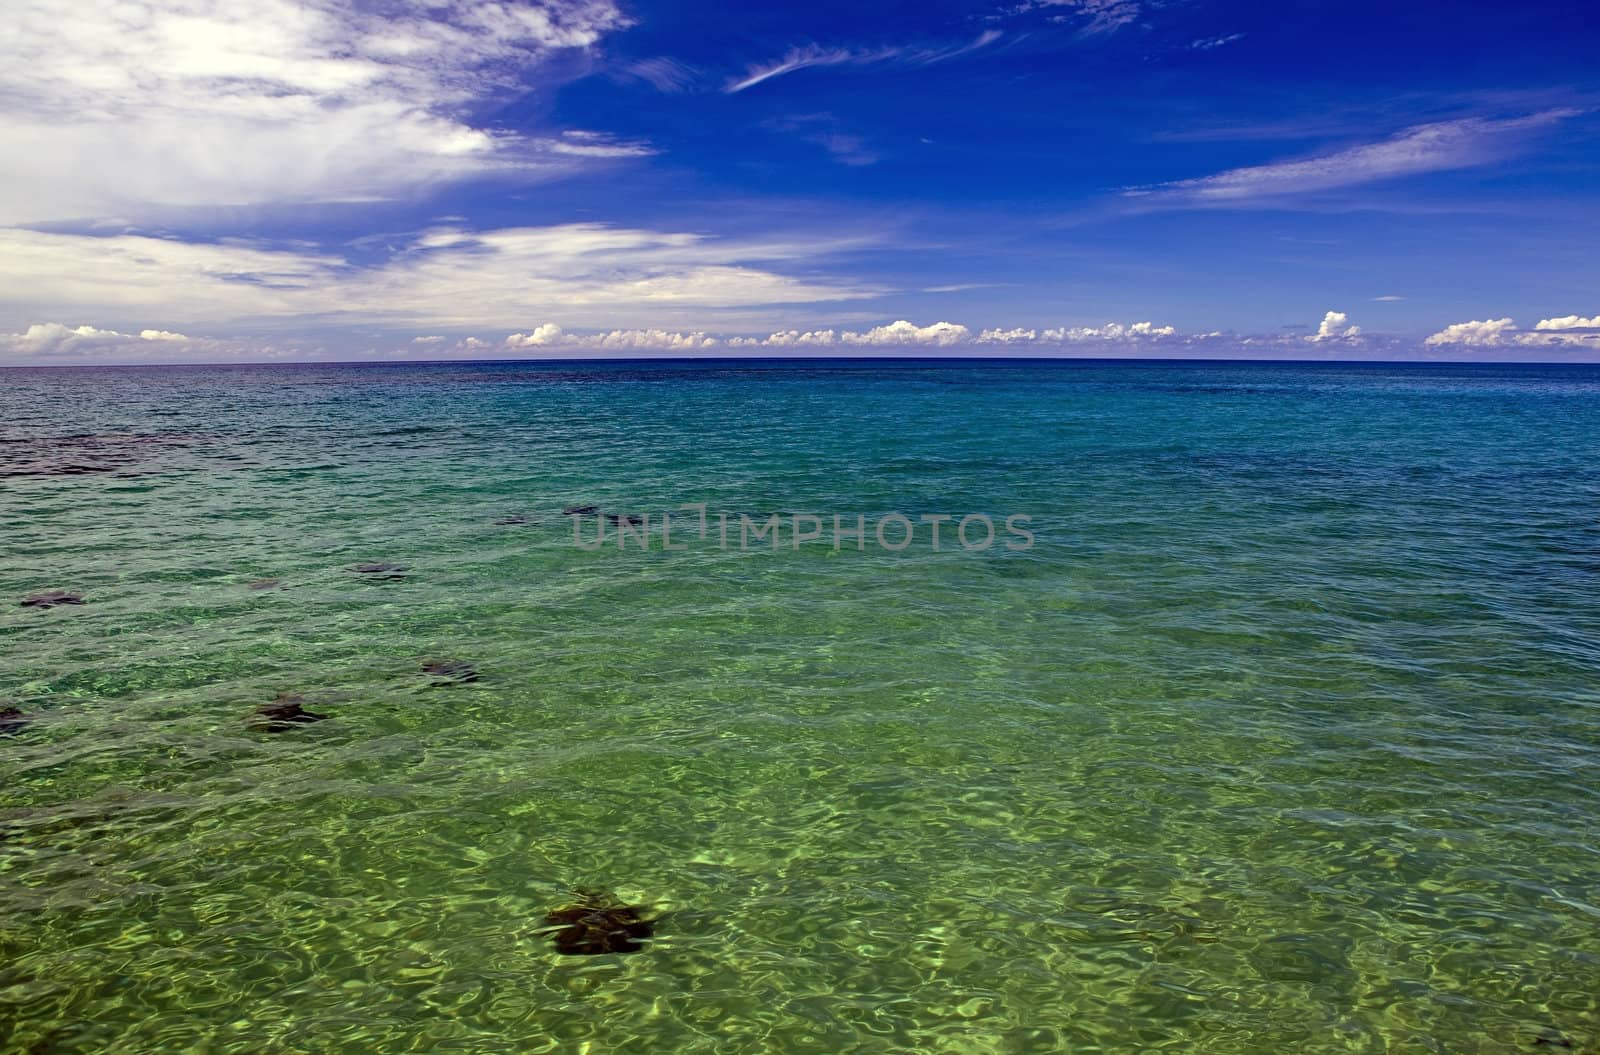 Bohol Island, Bohol, Central Visayas, Philippines - 5/17/2012 - A sweeping view of the Bohol Sea as seen from the boat dock from the little town of Dimiao, on the southeast coast of Bohol Island. Clear blue sky with creamy white clouds and ocean water ranging from emerald green to turquoise to dark blue.